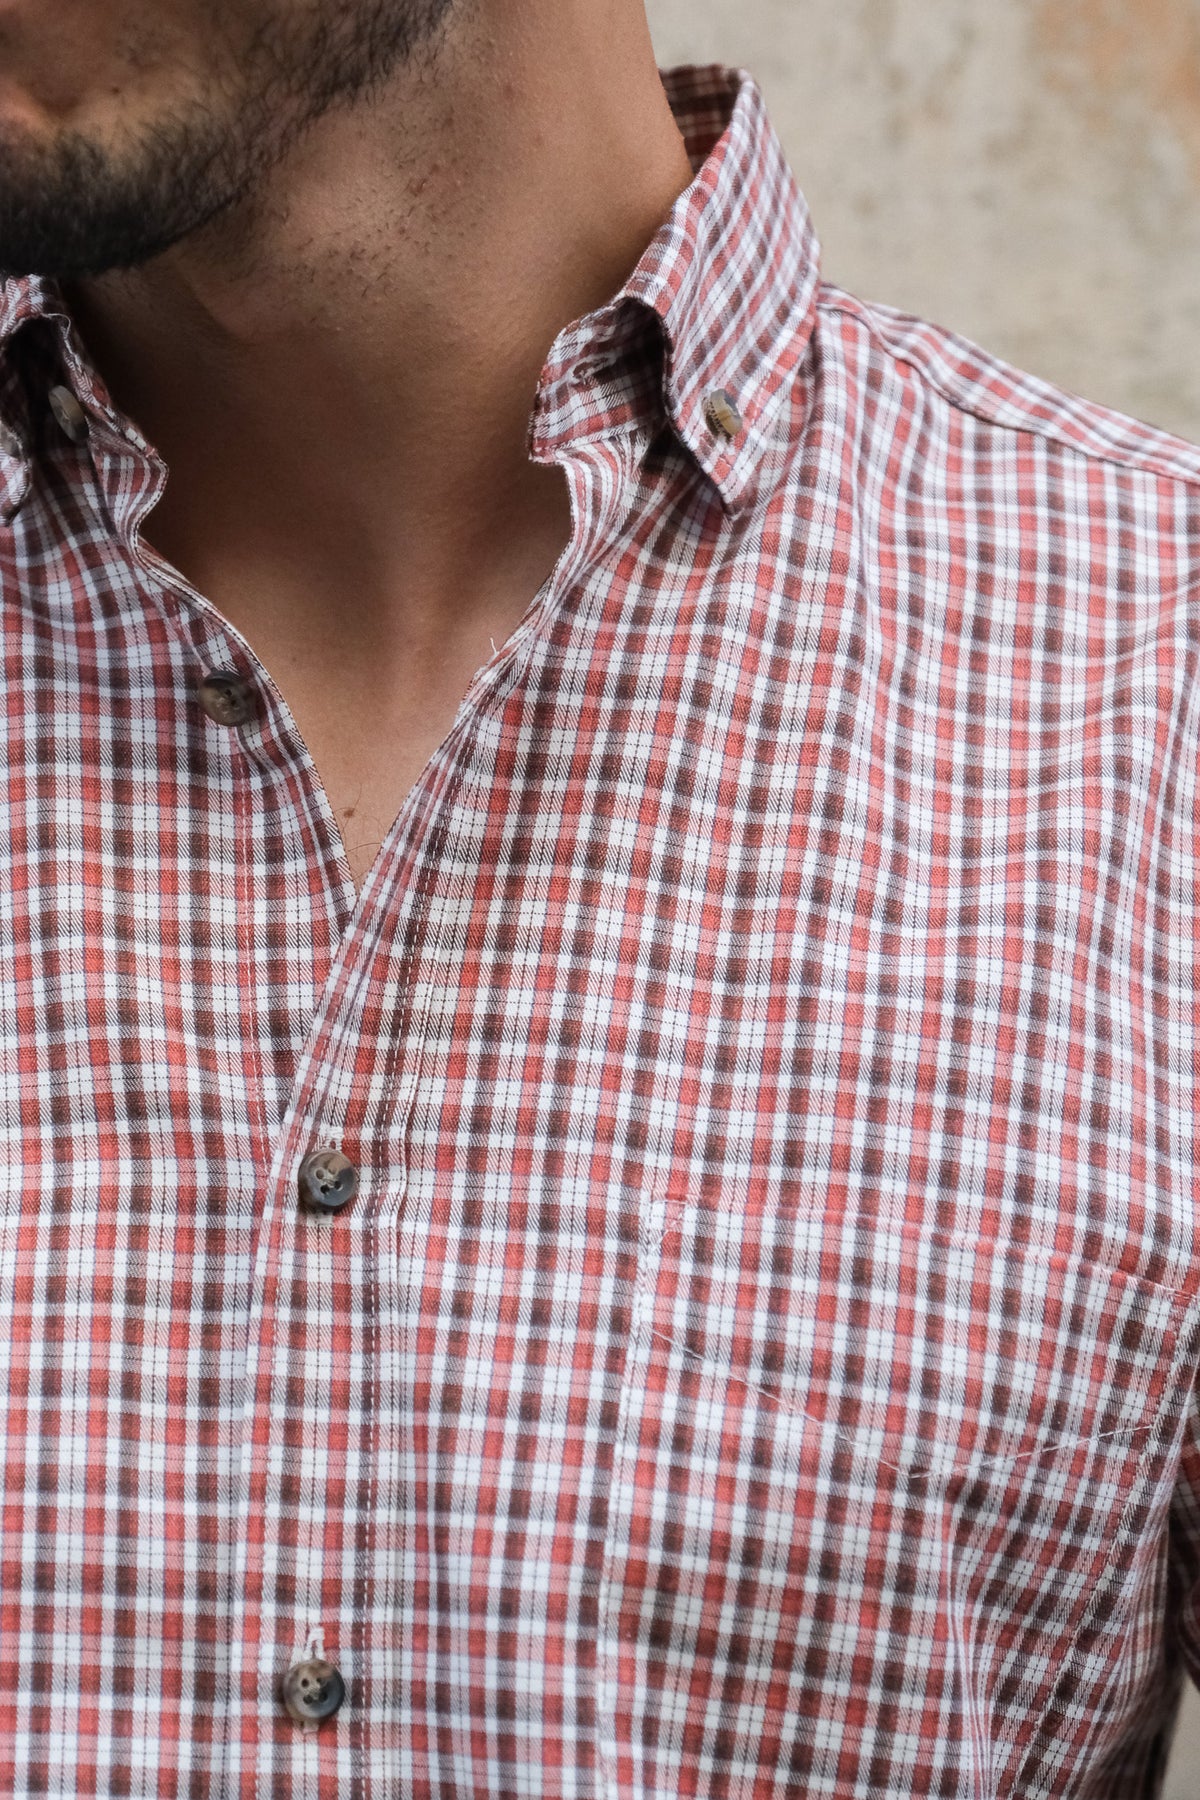 Casual shirt with check pattern in orange/white (Art. 2123-C)